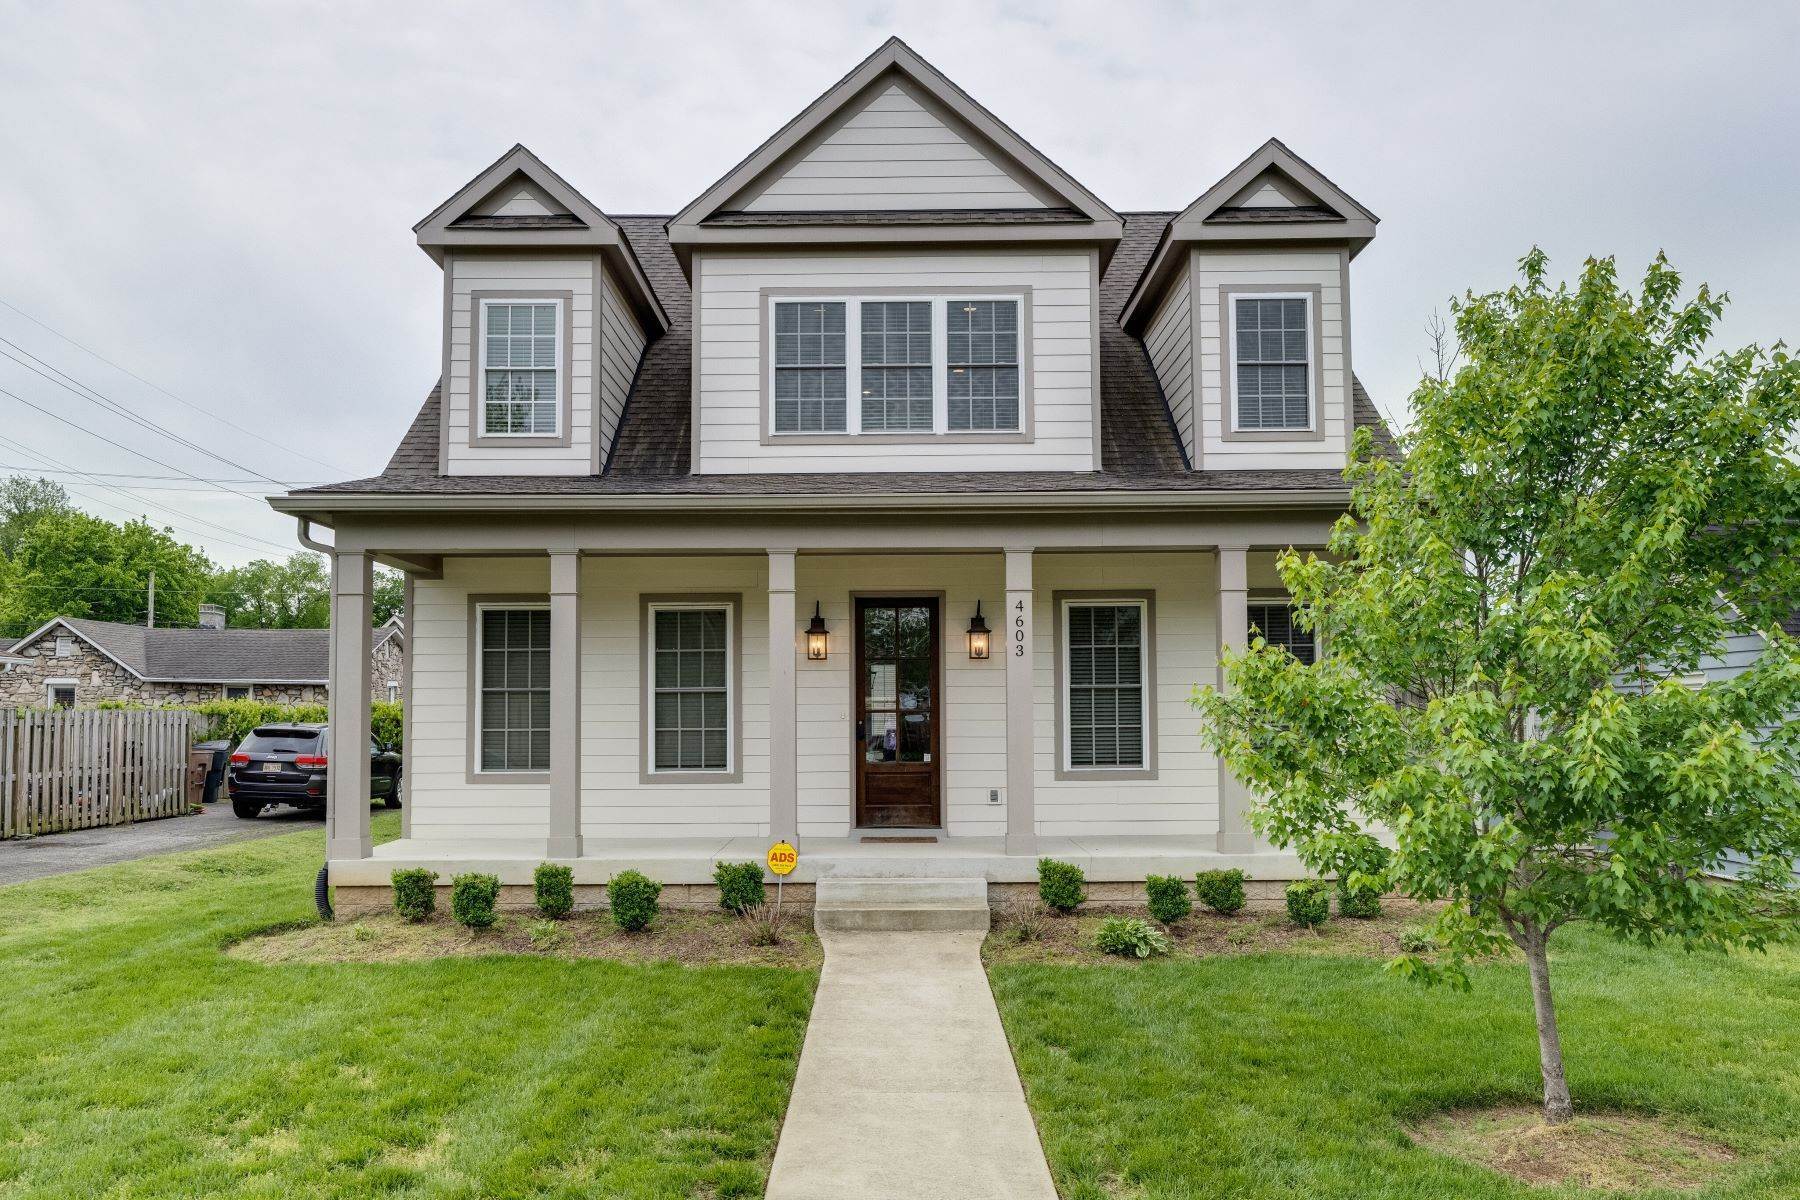 Single Family Homes for Sale at 4603 Idaho Ave, Nashville, TN, 37209 4603 Idaho Ave Nashville, Tennessee 37209 United States